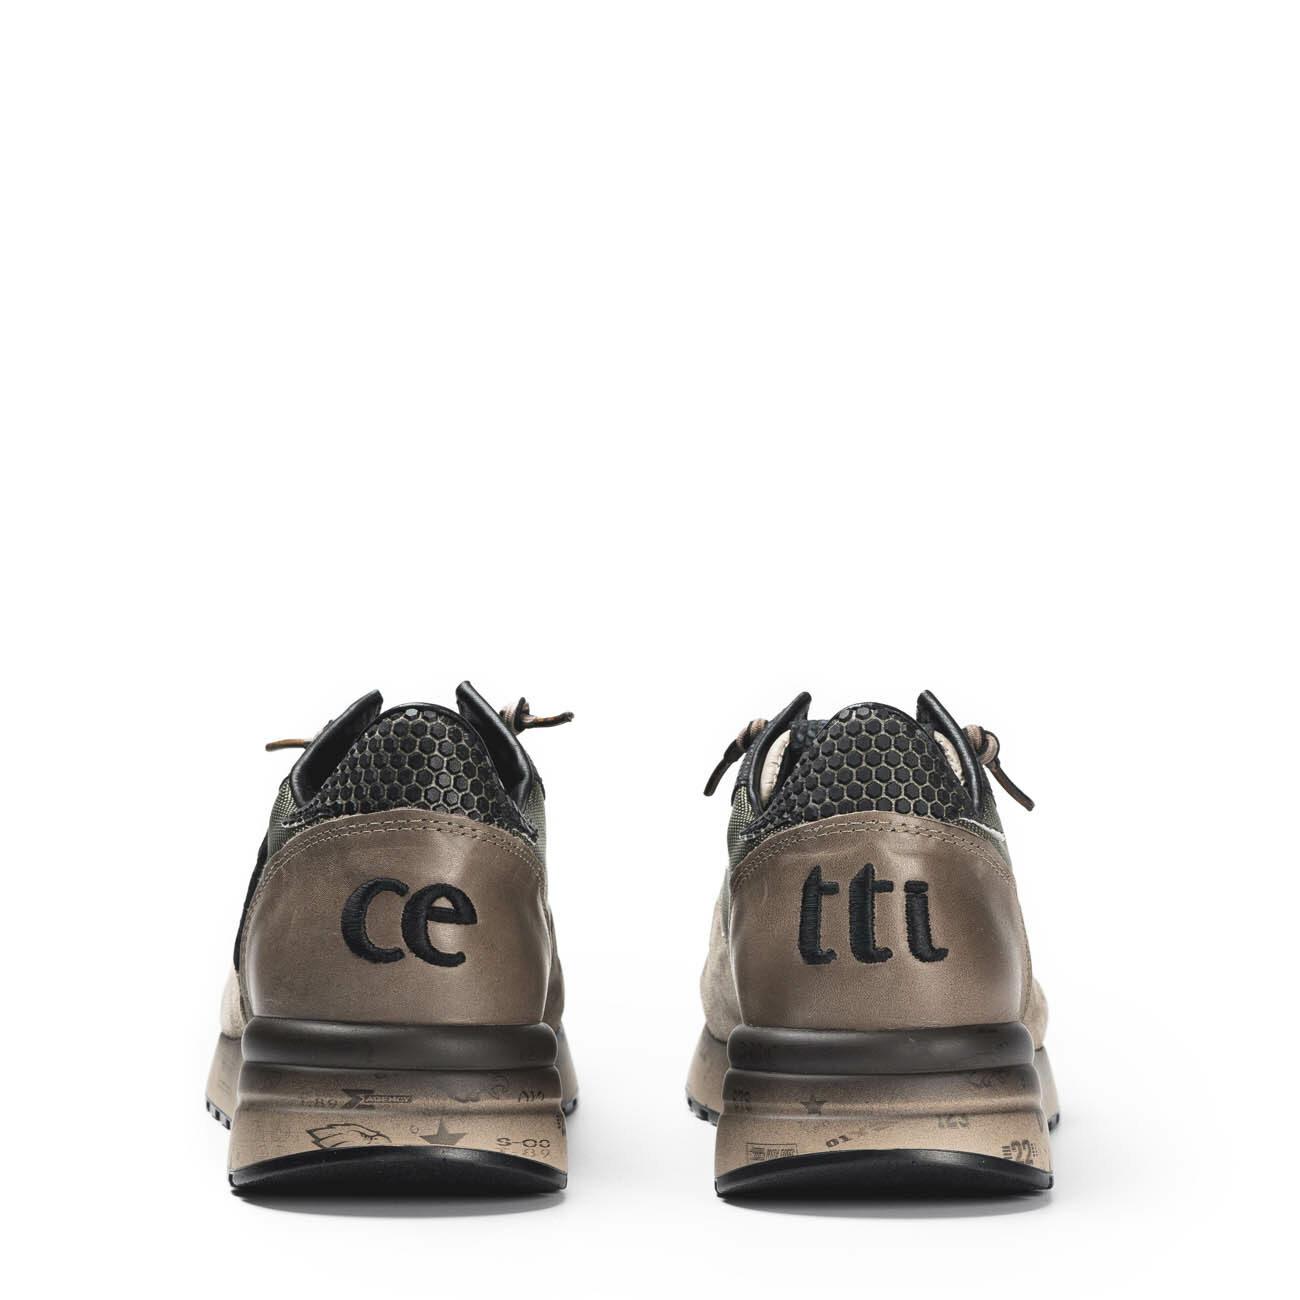 Sneakers Cetti C-1301 taupe - Acampada Shoes